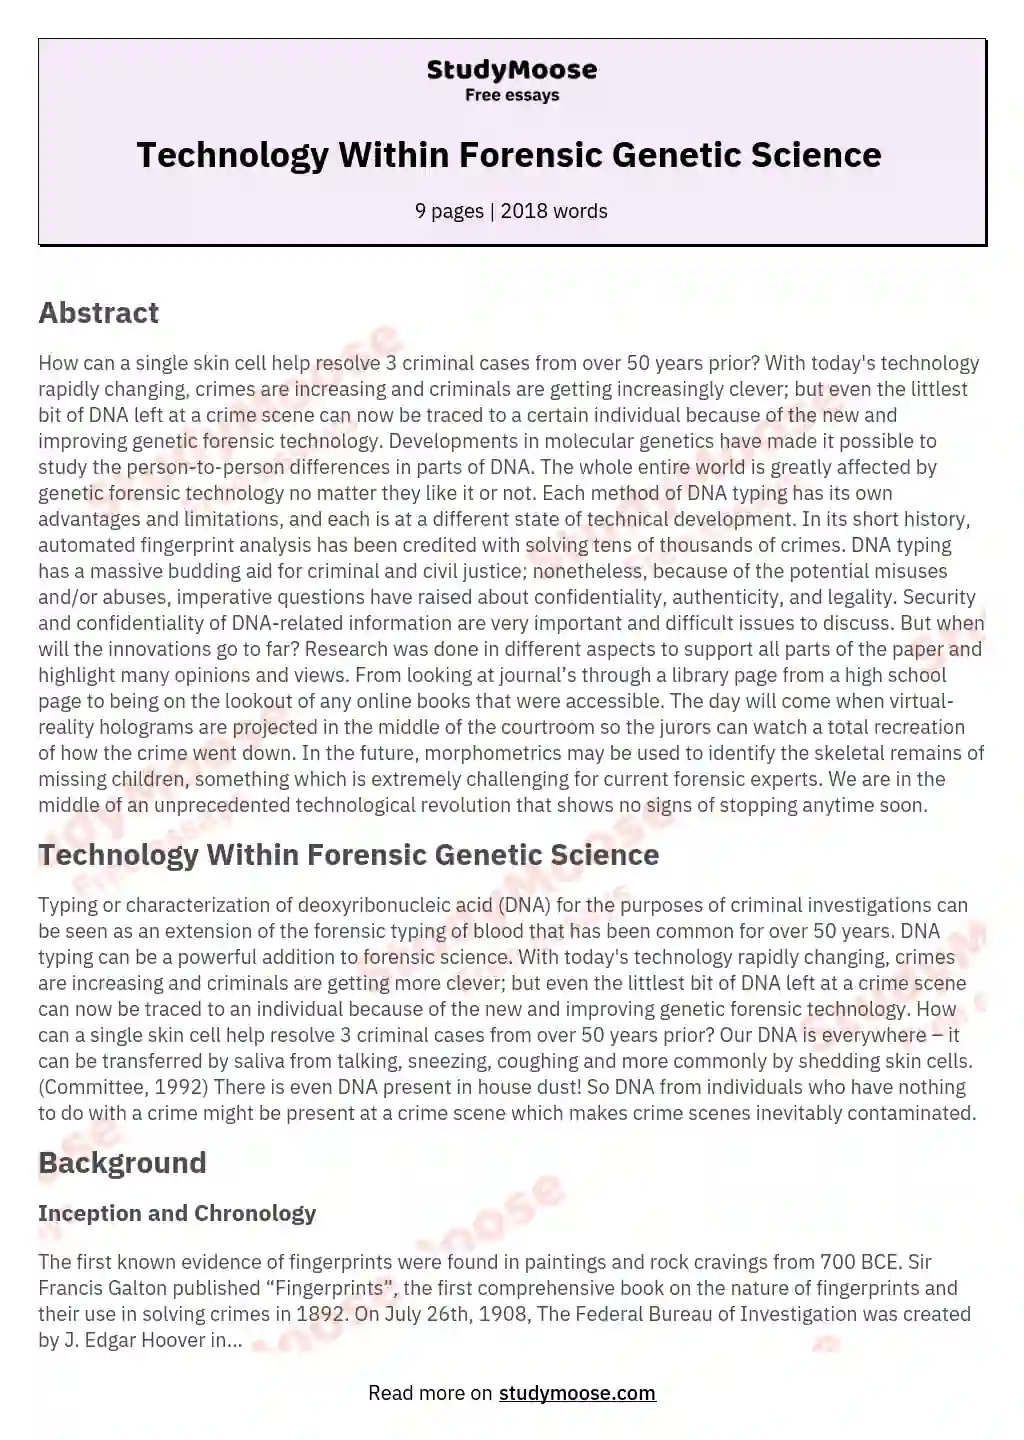 Technology Within Forensic Genetic Science 